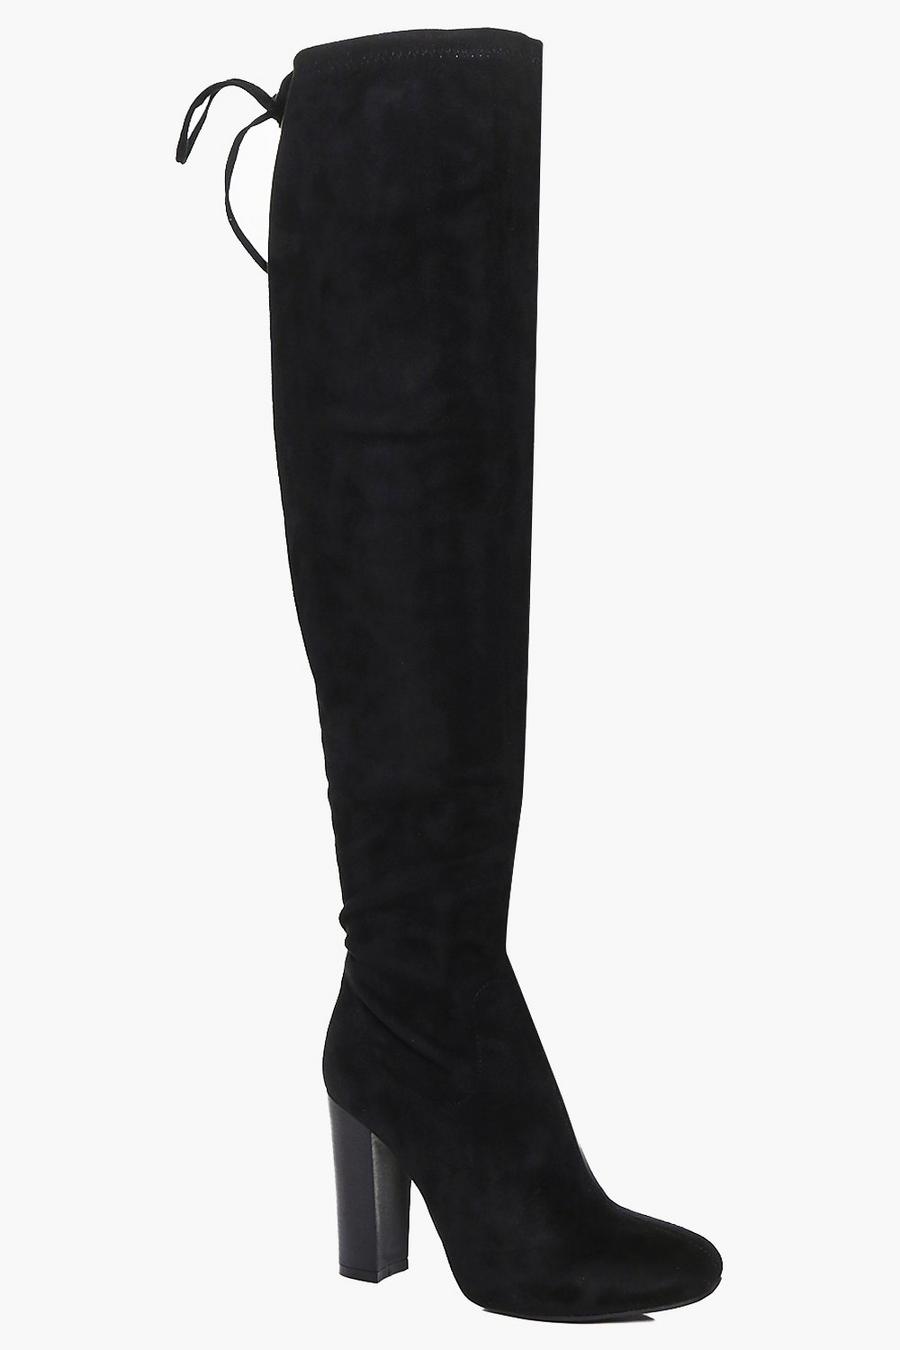 Black Stretch Over Knee Boot With Lace Details image number 1